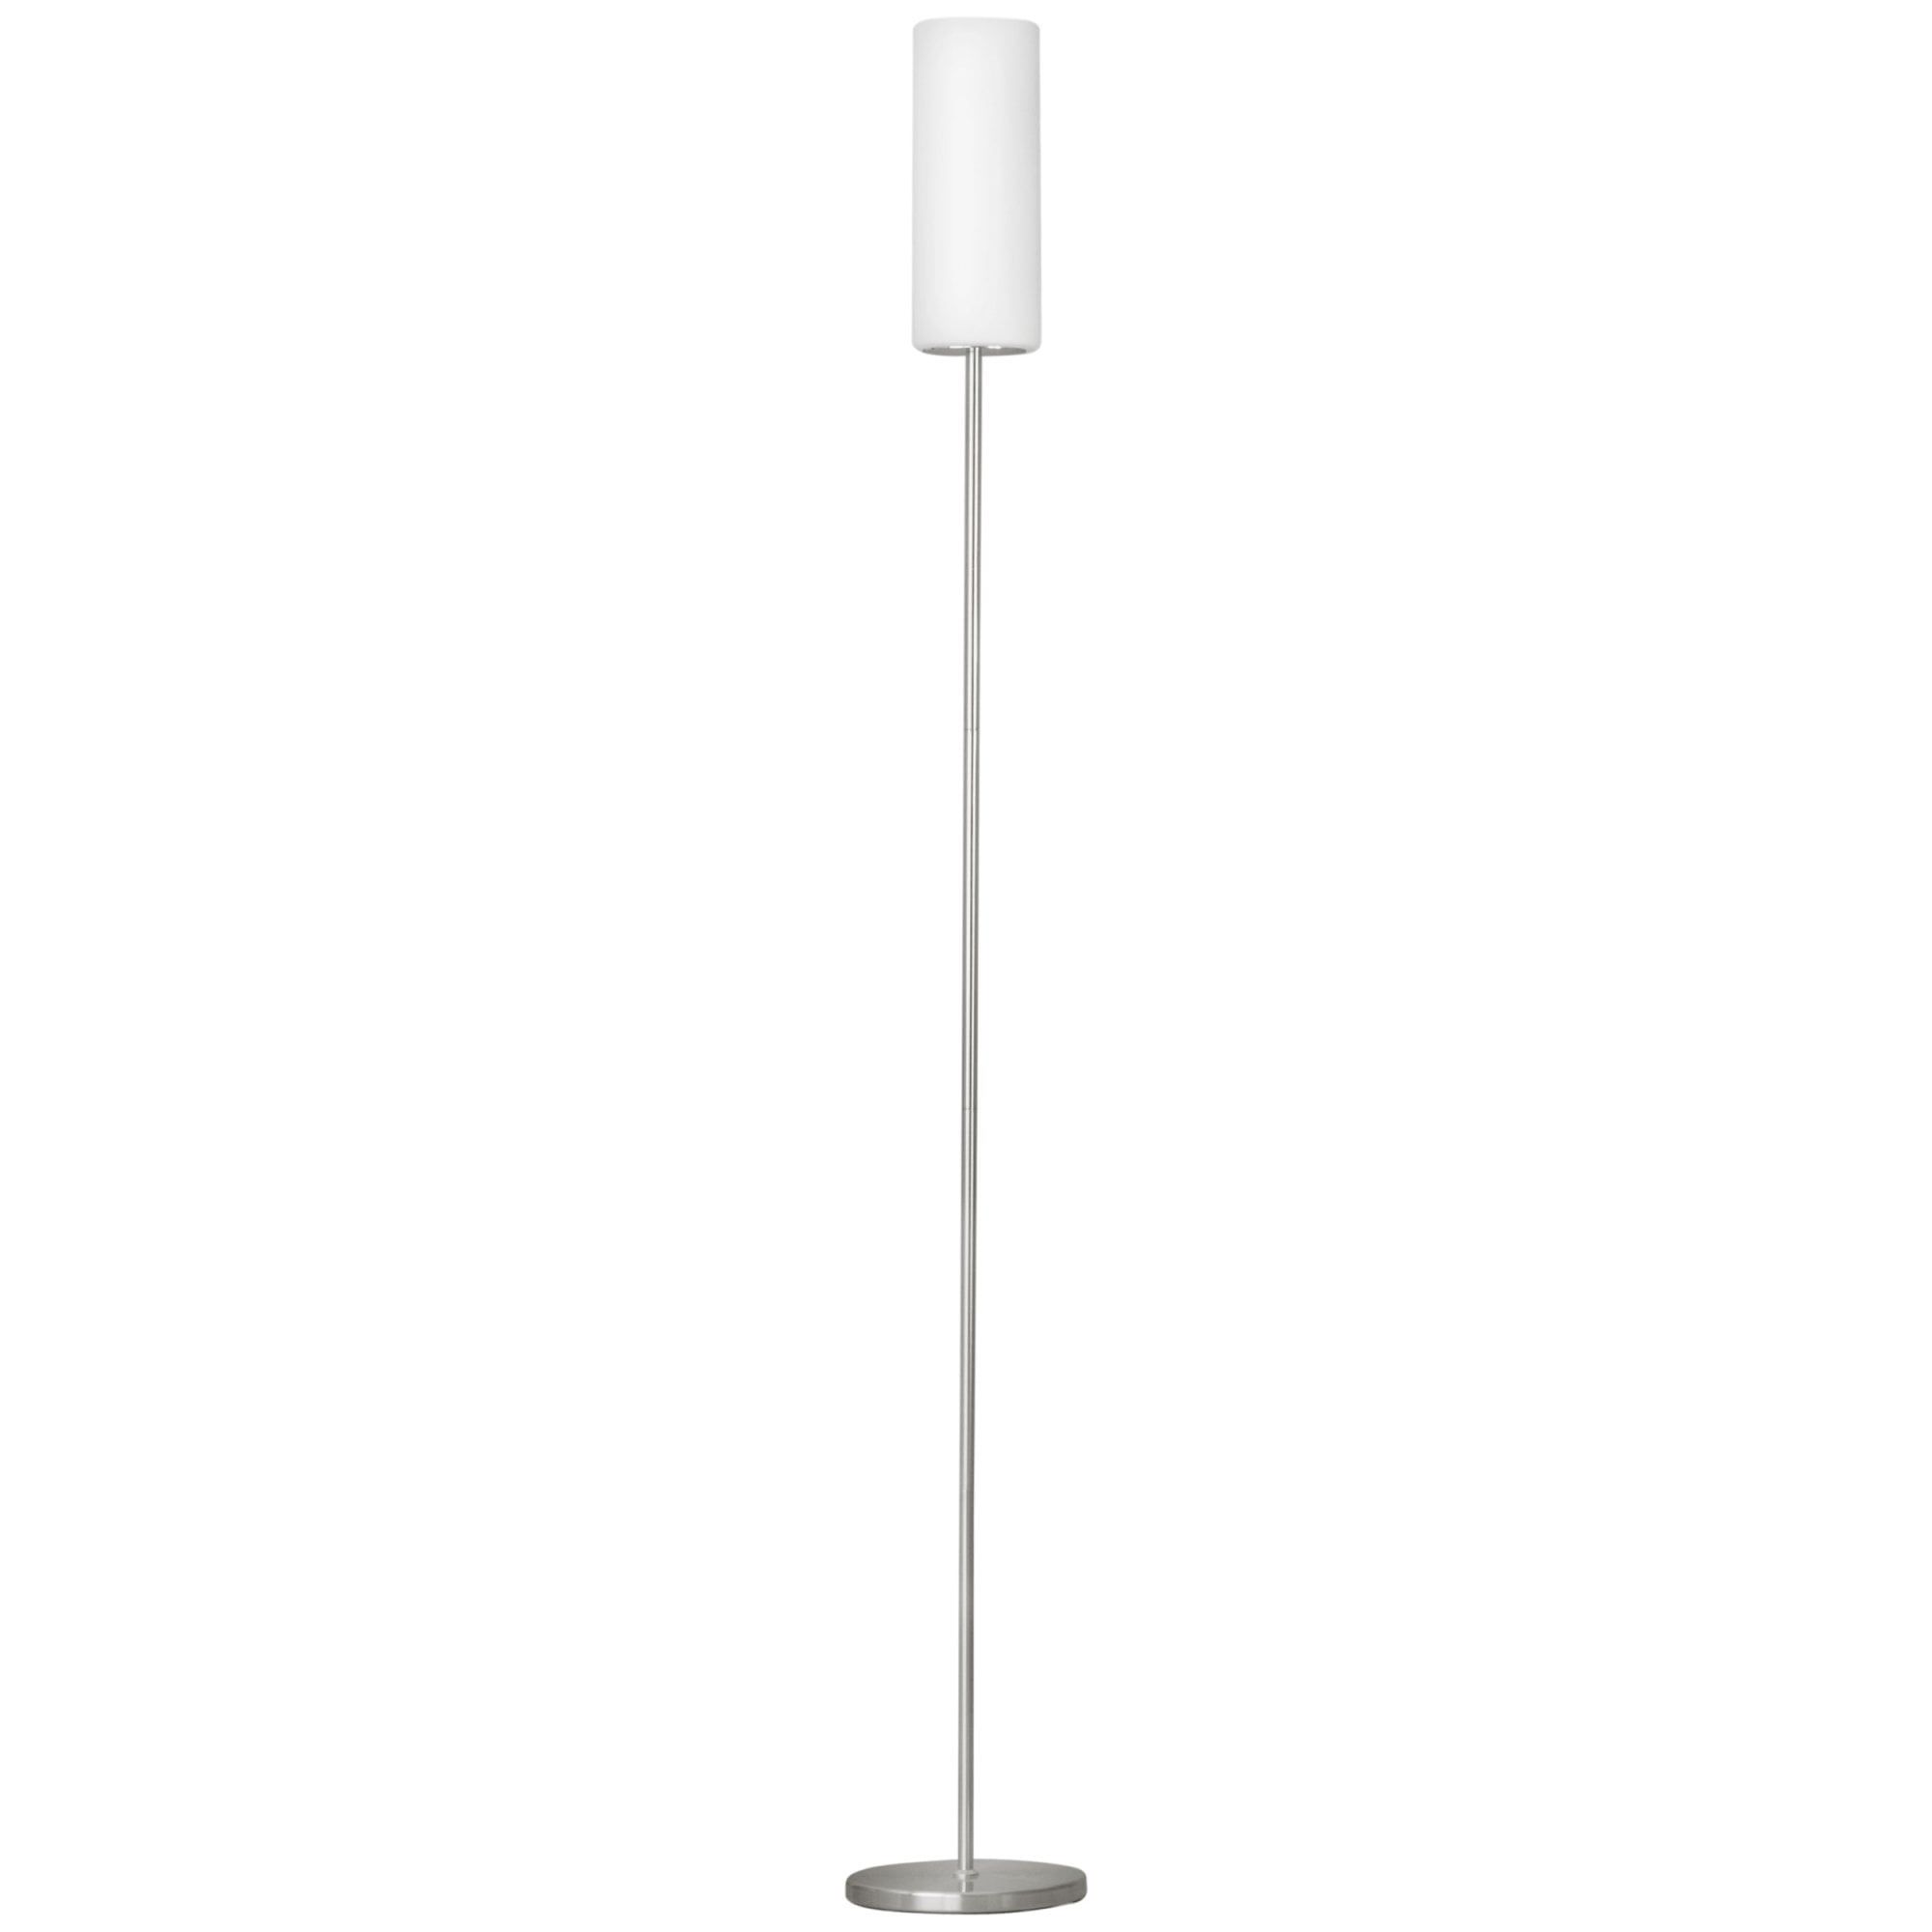 Satin Nickel White Satin Glass Cylinder Floor Lamp Lighting Lights Uk In Glass Satin Nickel Floor Lamps (View 2 of 15)